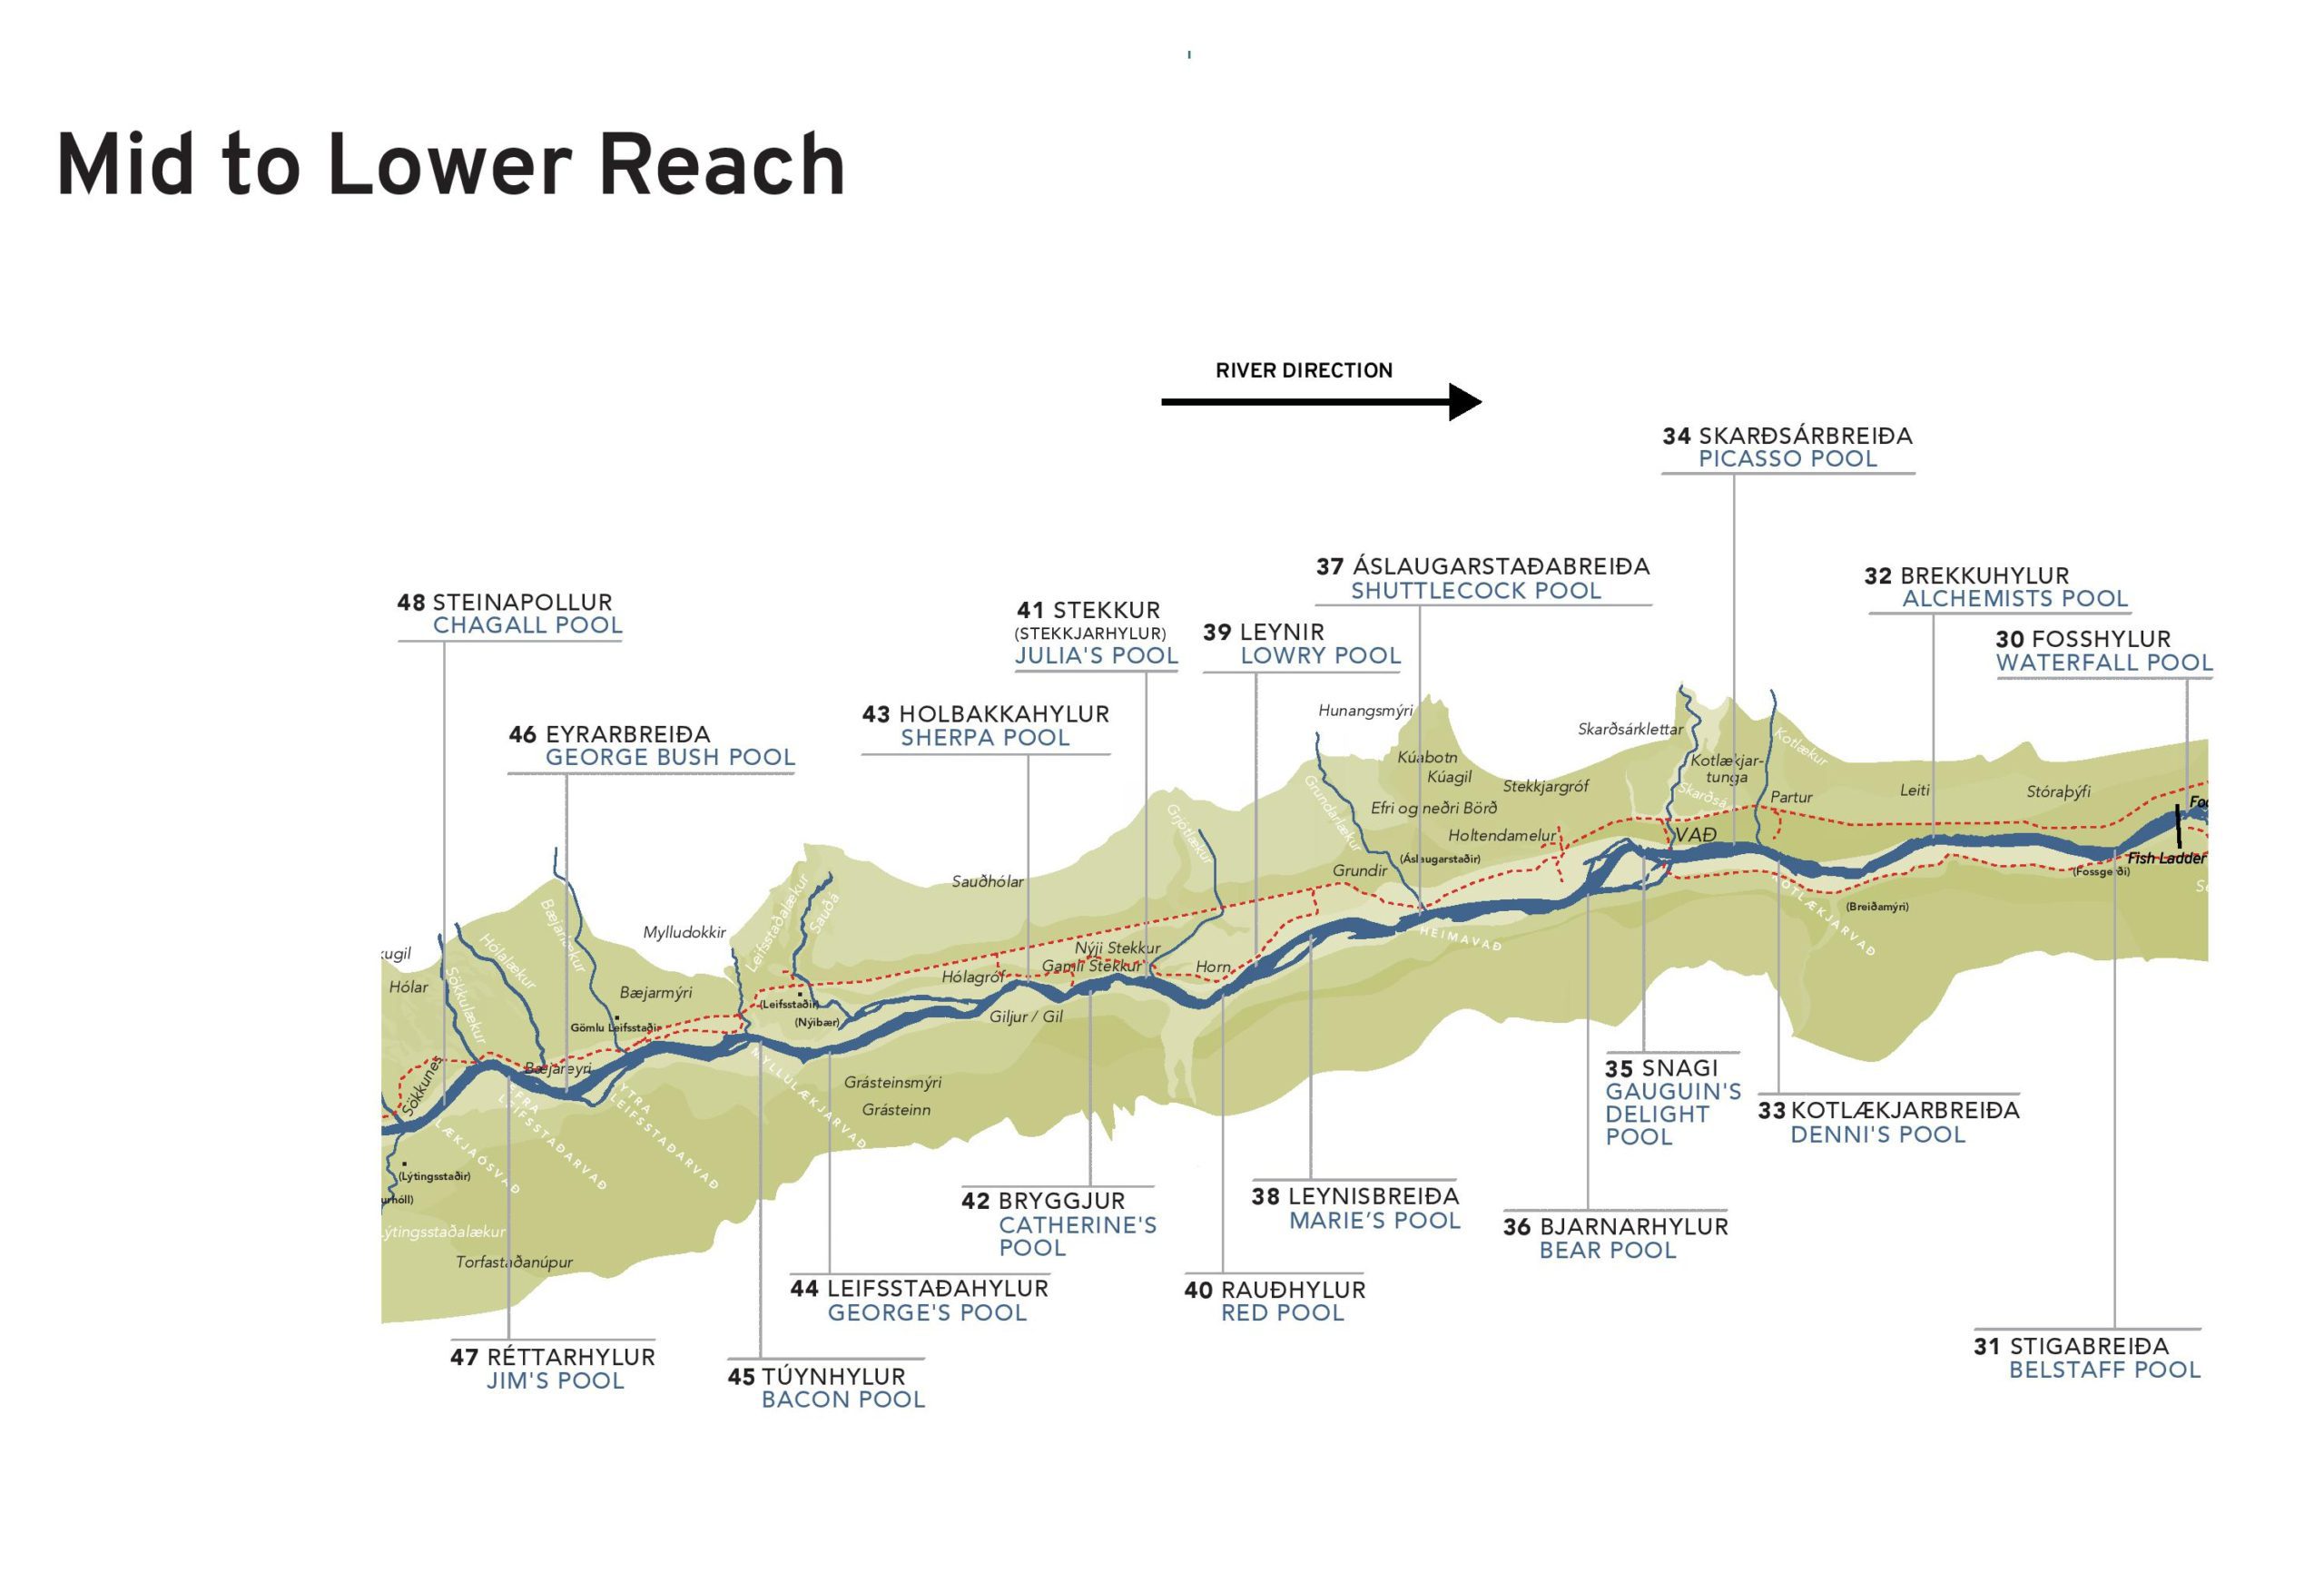 Map Graphic of the River Selá's Mid to Lower Reach